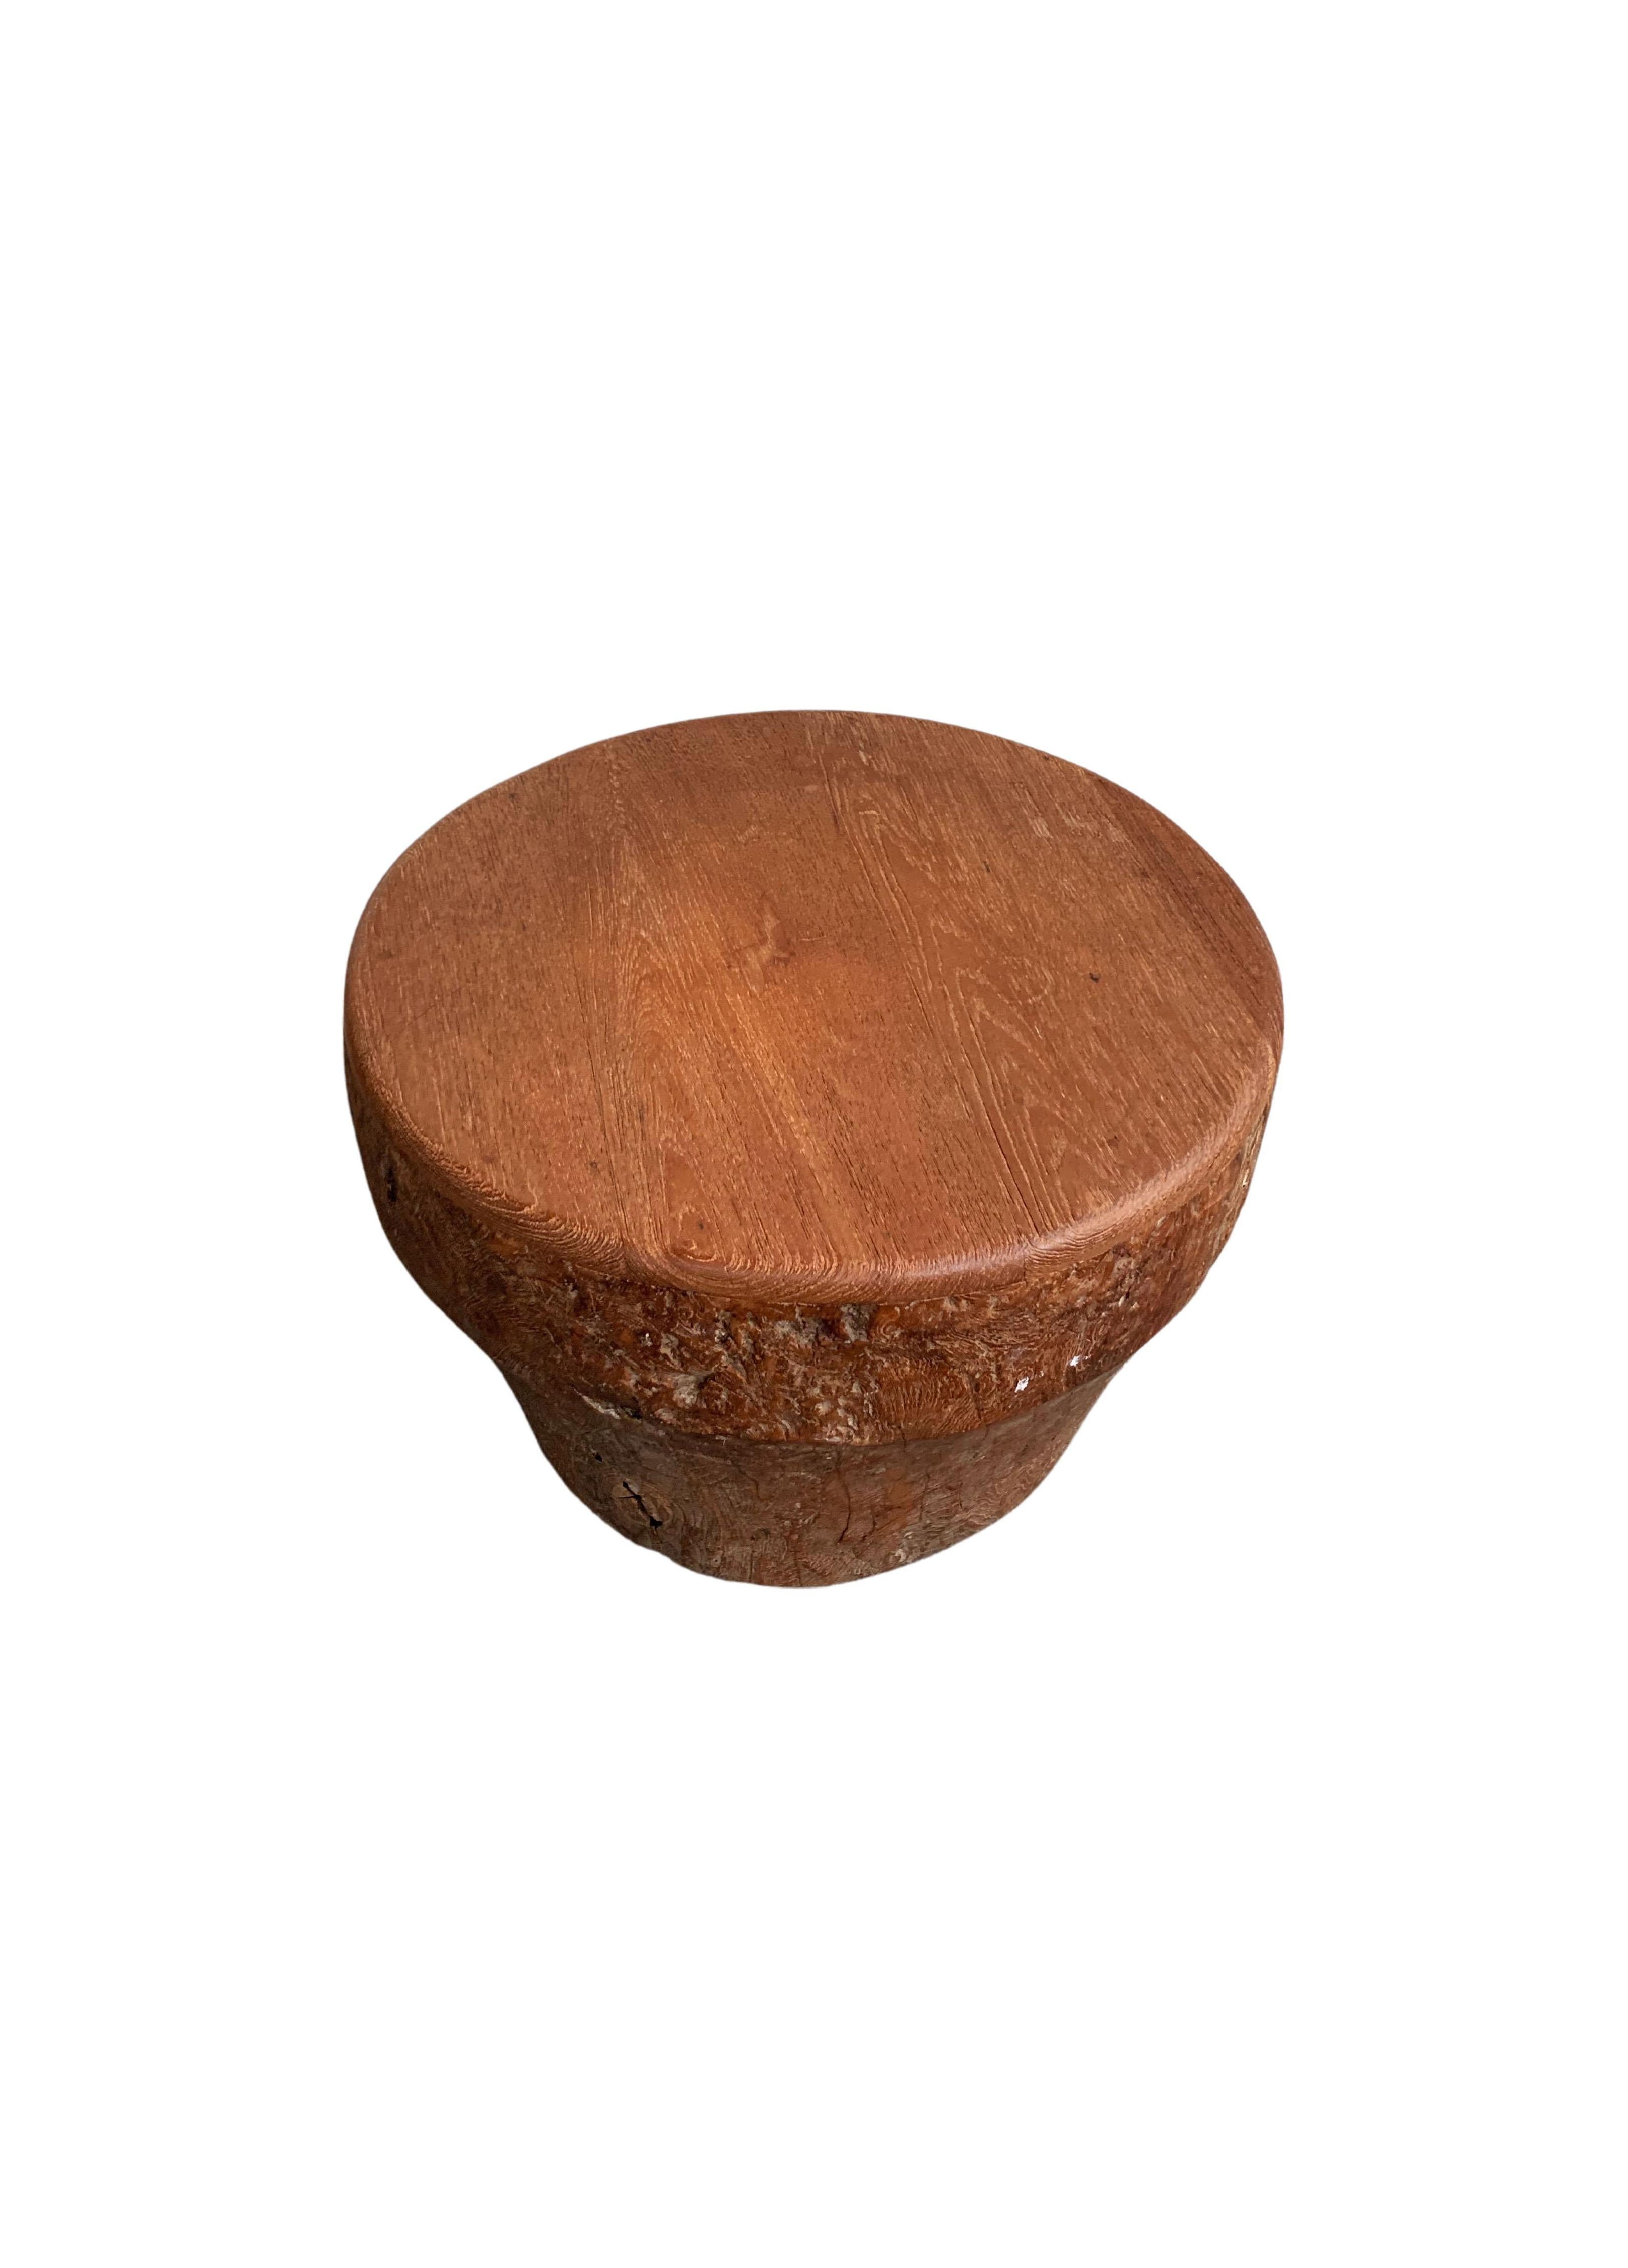 Hand-Crafted Teak Drum Low Table Crafted in Indonesia